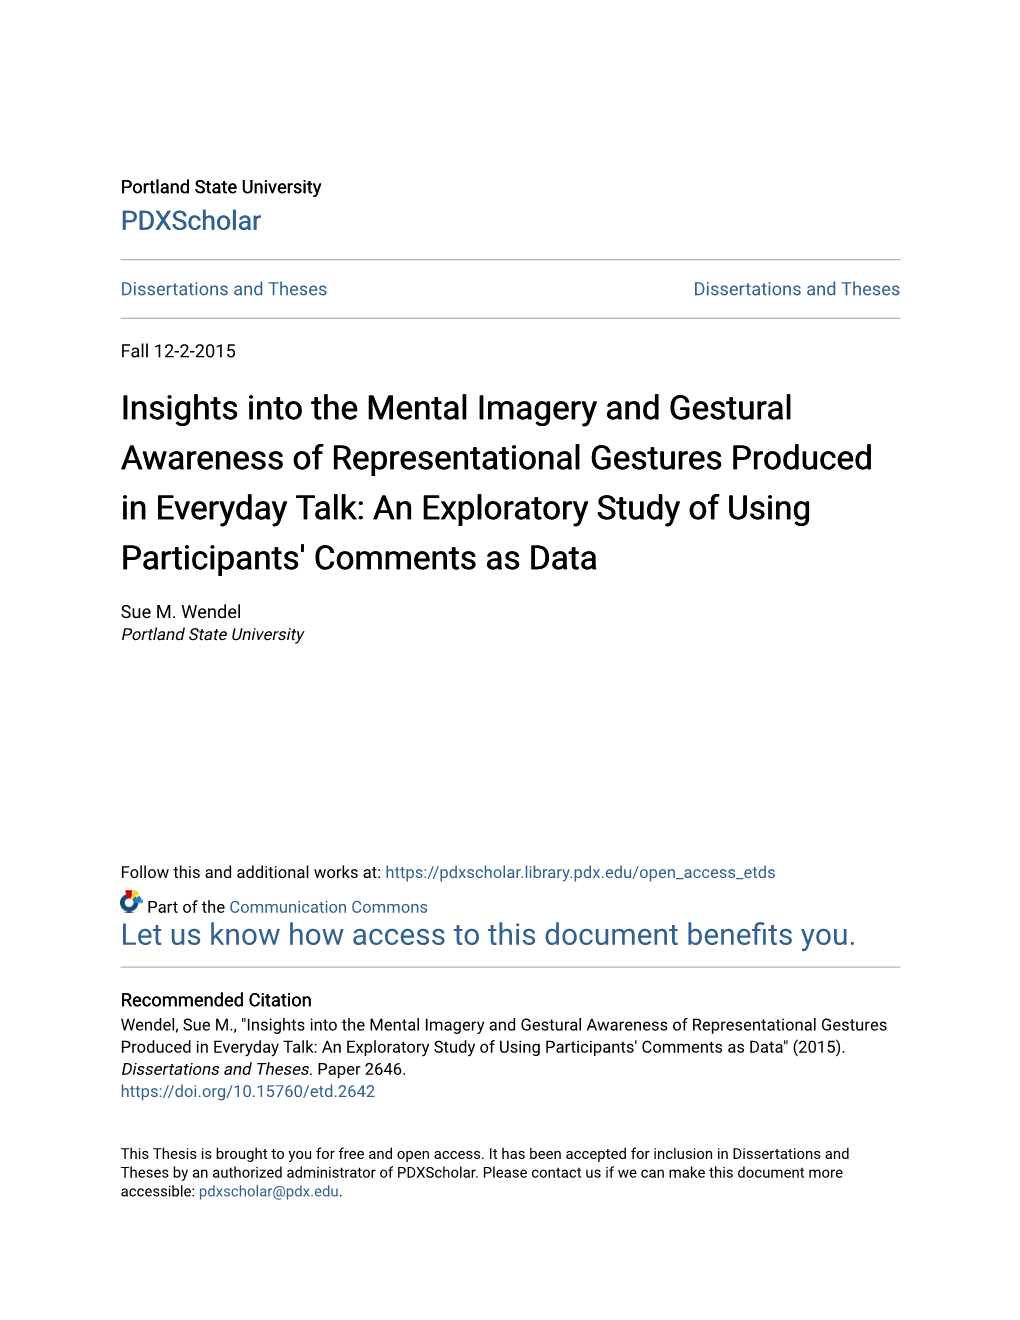 Insights Into the Mental Imagery and Gestural Awareness